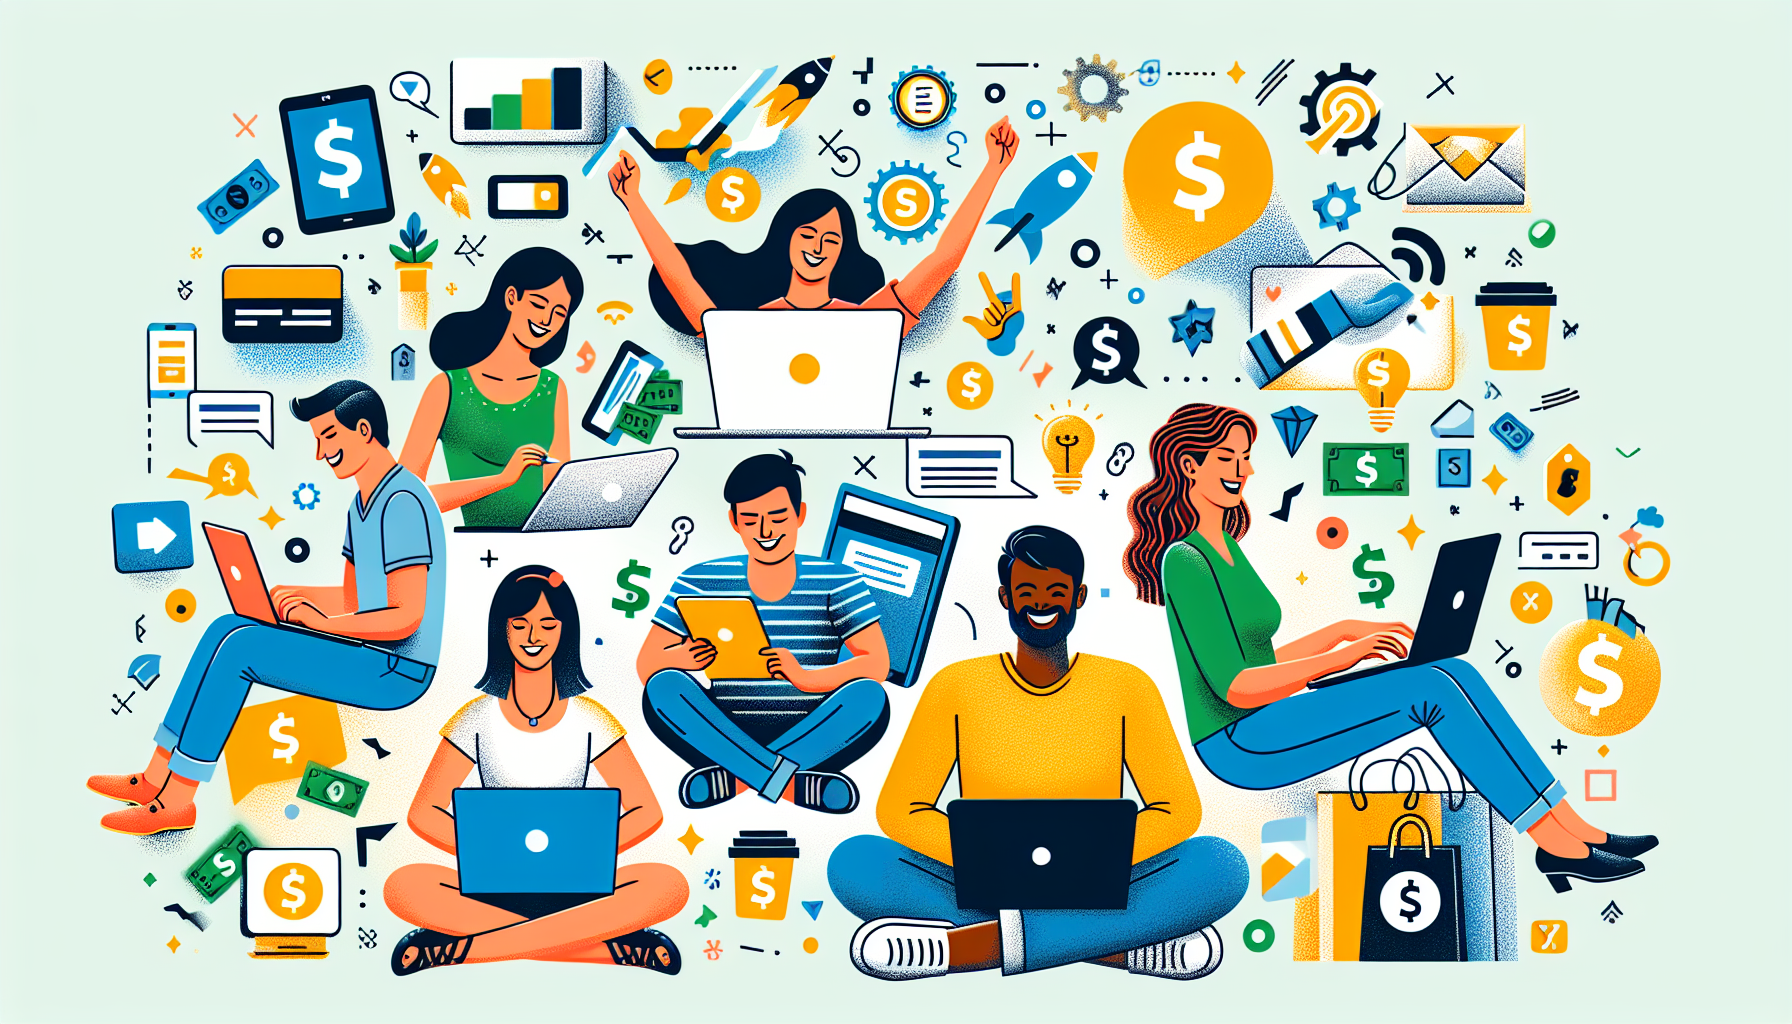 Create an illustration featuring a diverse group of people happily participating in online surveys on their laptops and tablets. Surround them with imagery of dollar signs, gift cards, and various tec